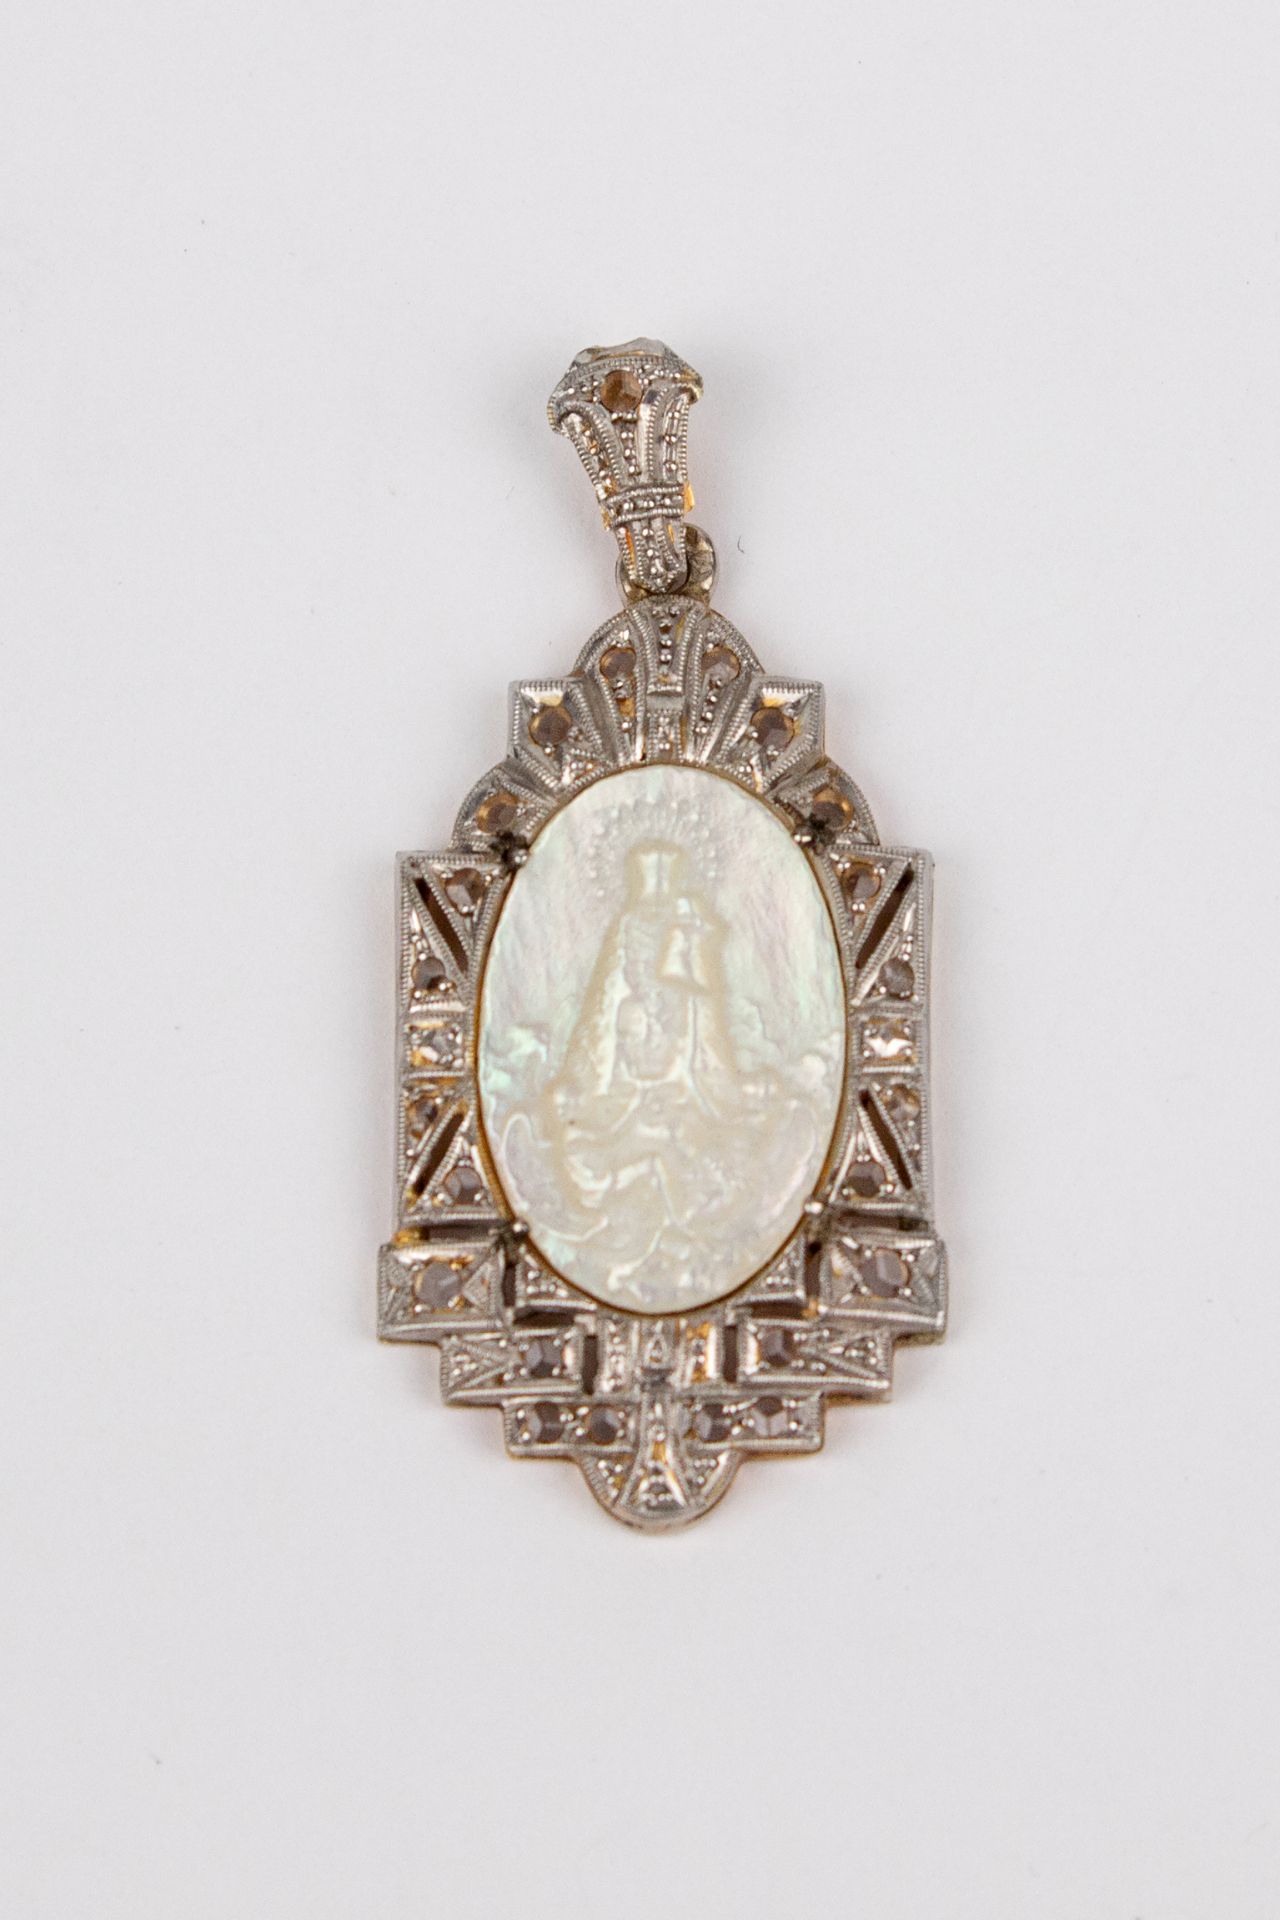 An Art-Déco gold, platinum, diamonds and mother of pearl devotional medal circa 1930